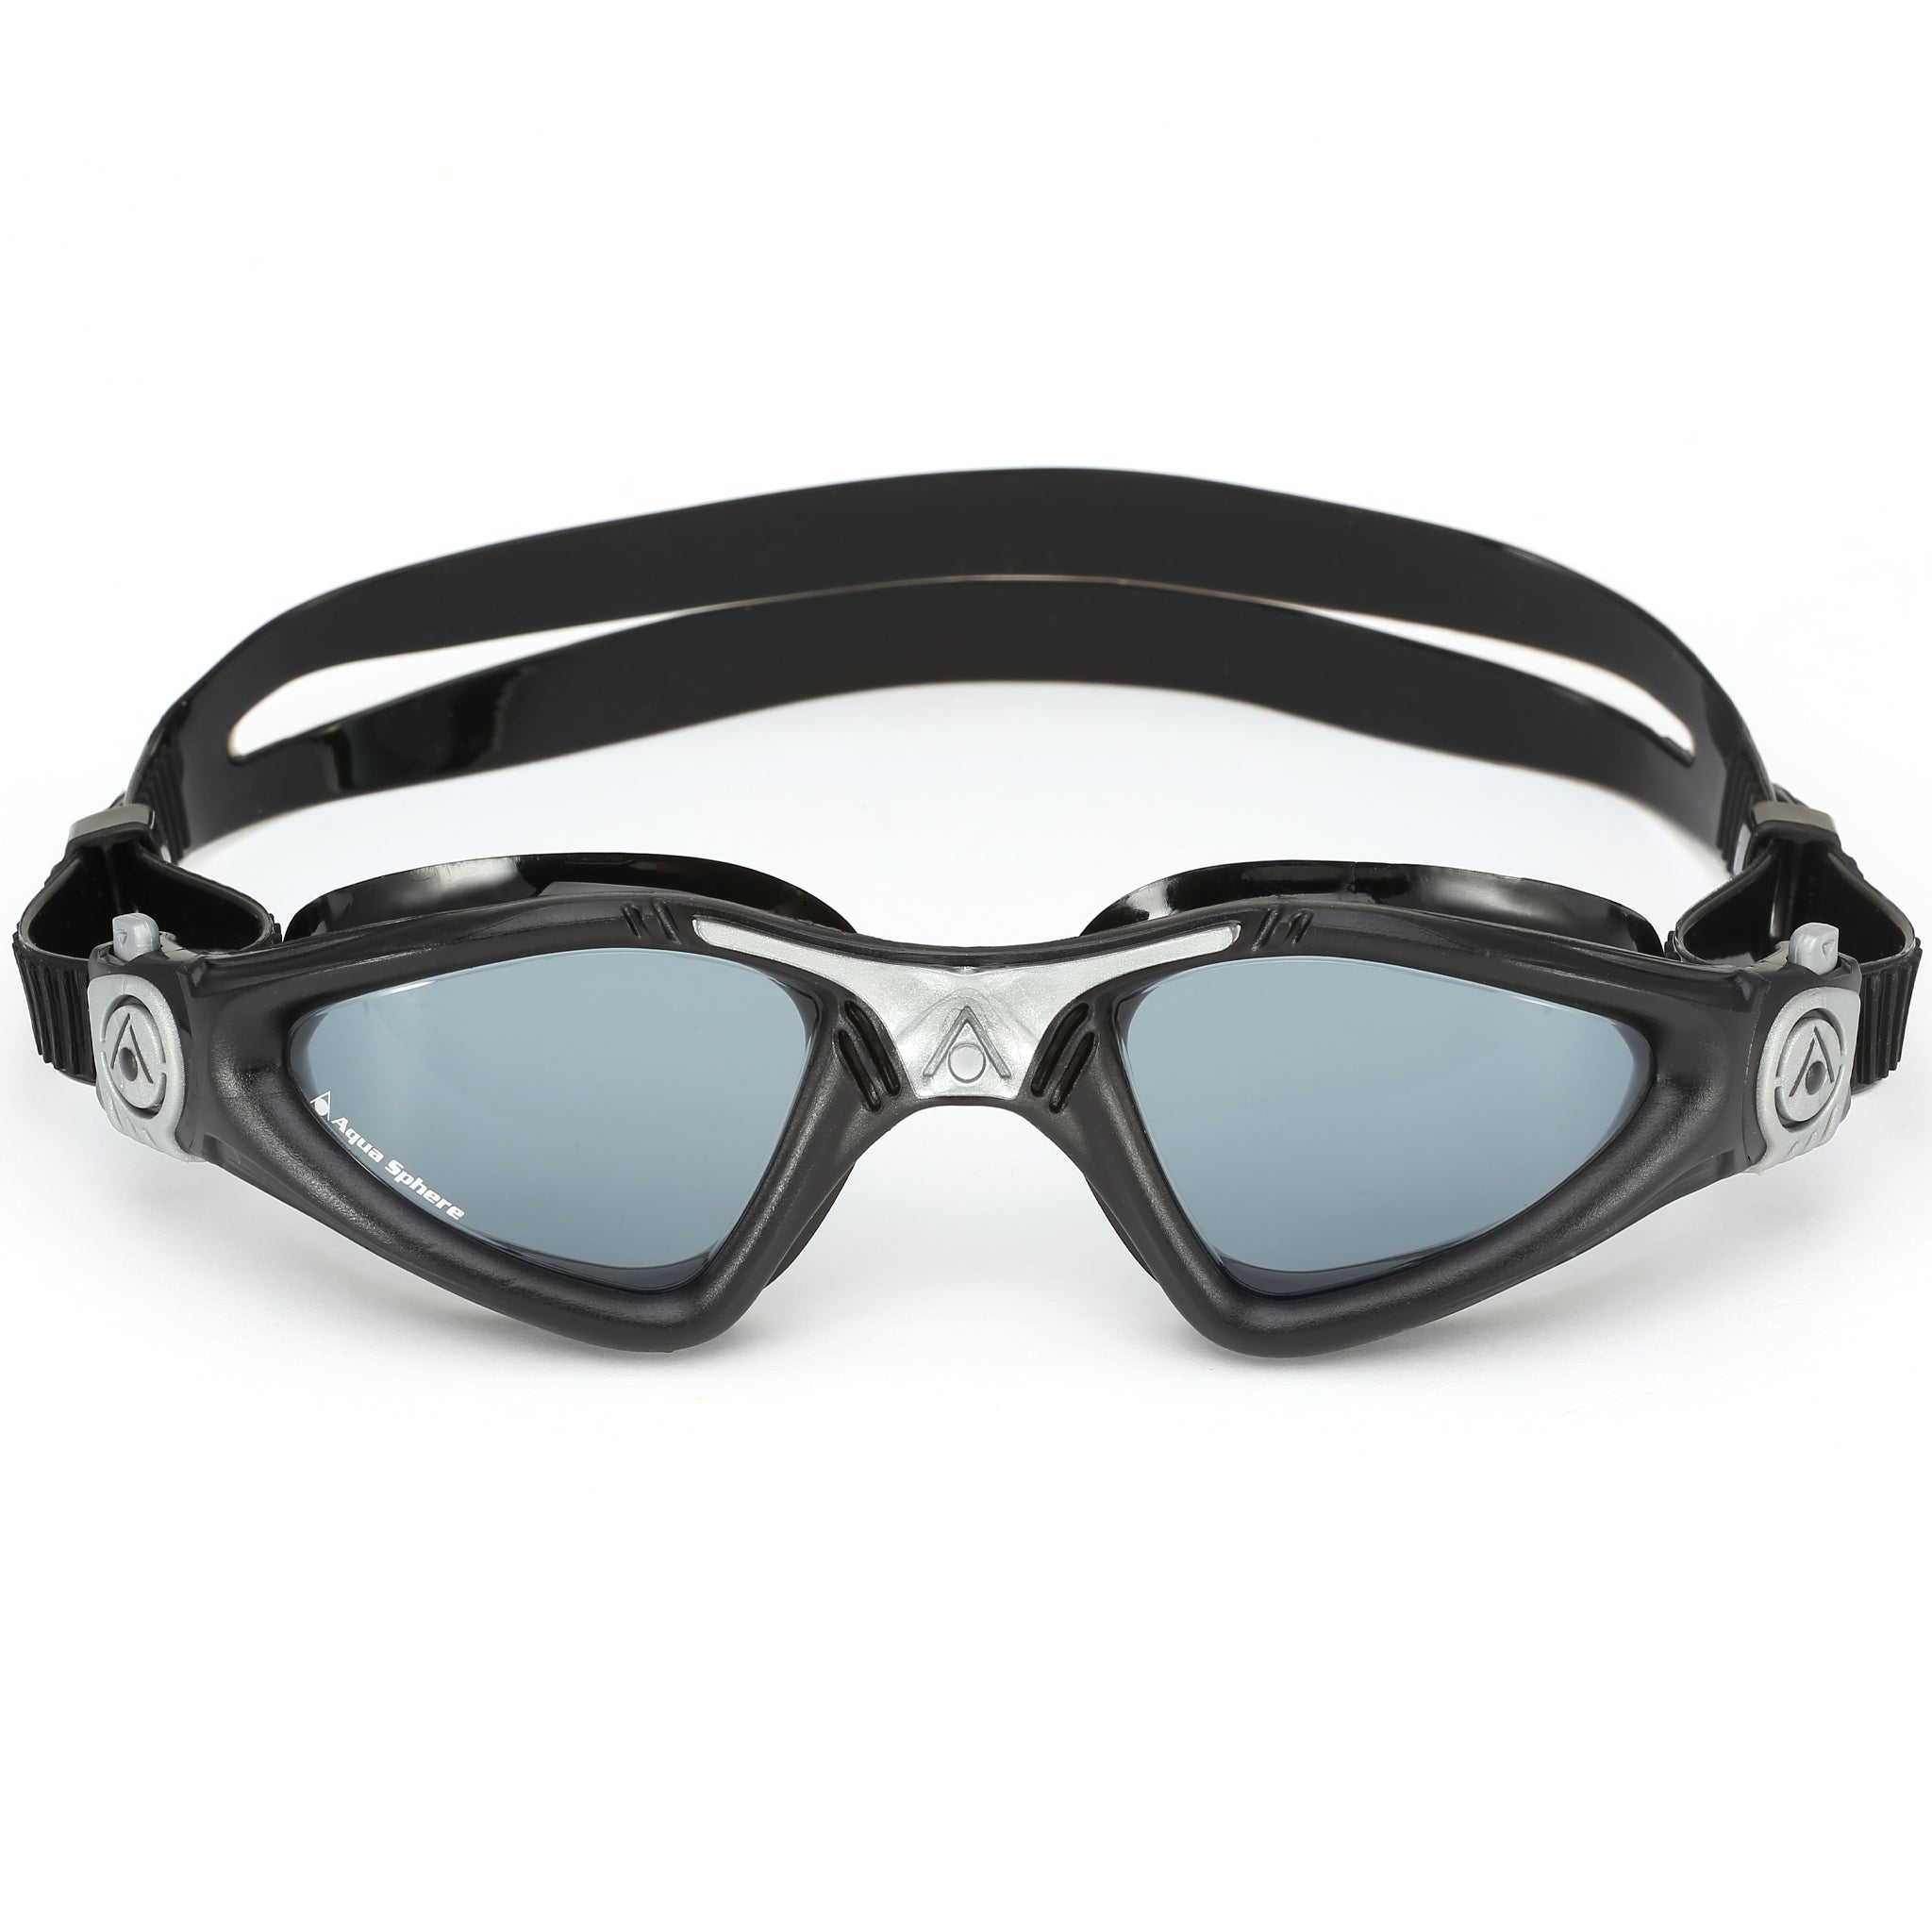 Aquasphere Kayenne Swimming Goggles Smoke Tinted Lenses | Black/Silver Front